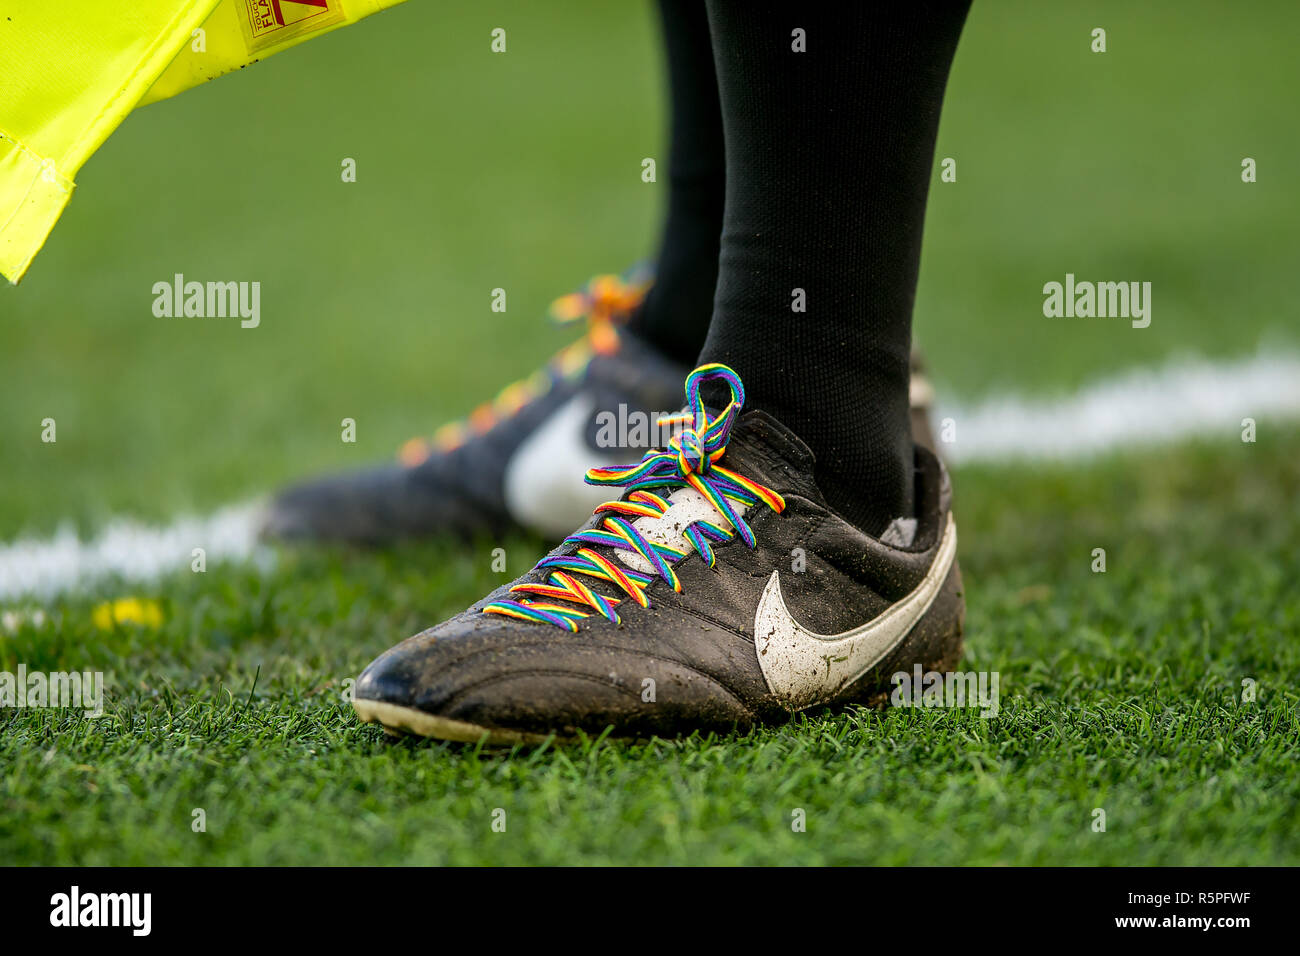 London, UK. 2nd Dec 2018. Referee is wearing rainbow colour laces on his  boots during the Premier League match between Chelsea and Fulham at  Stamford Bridge, London, England on 2 December 2018.